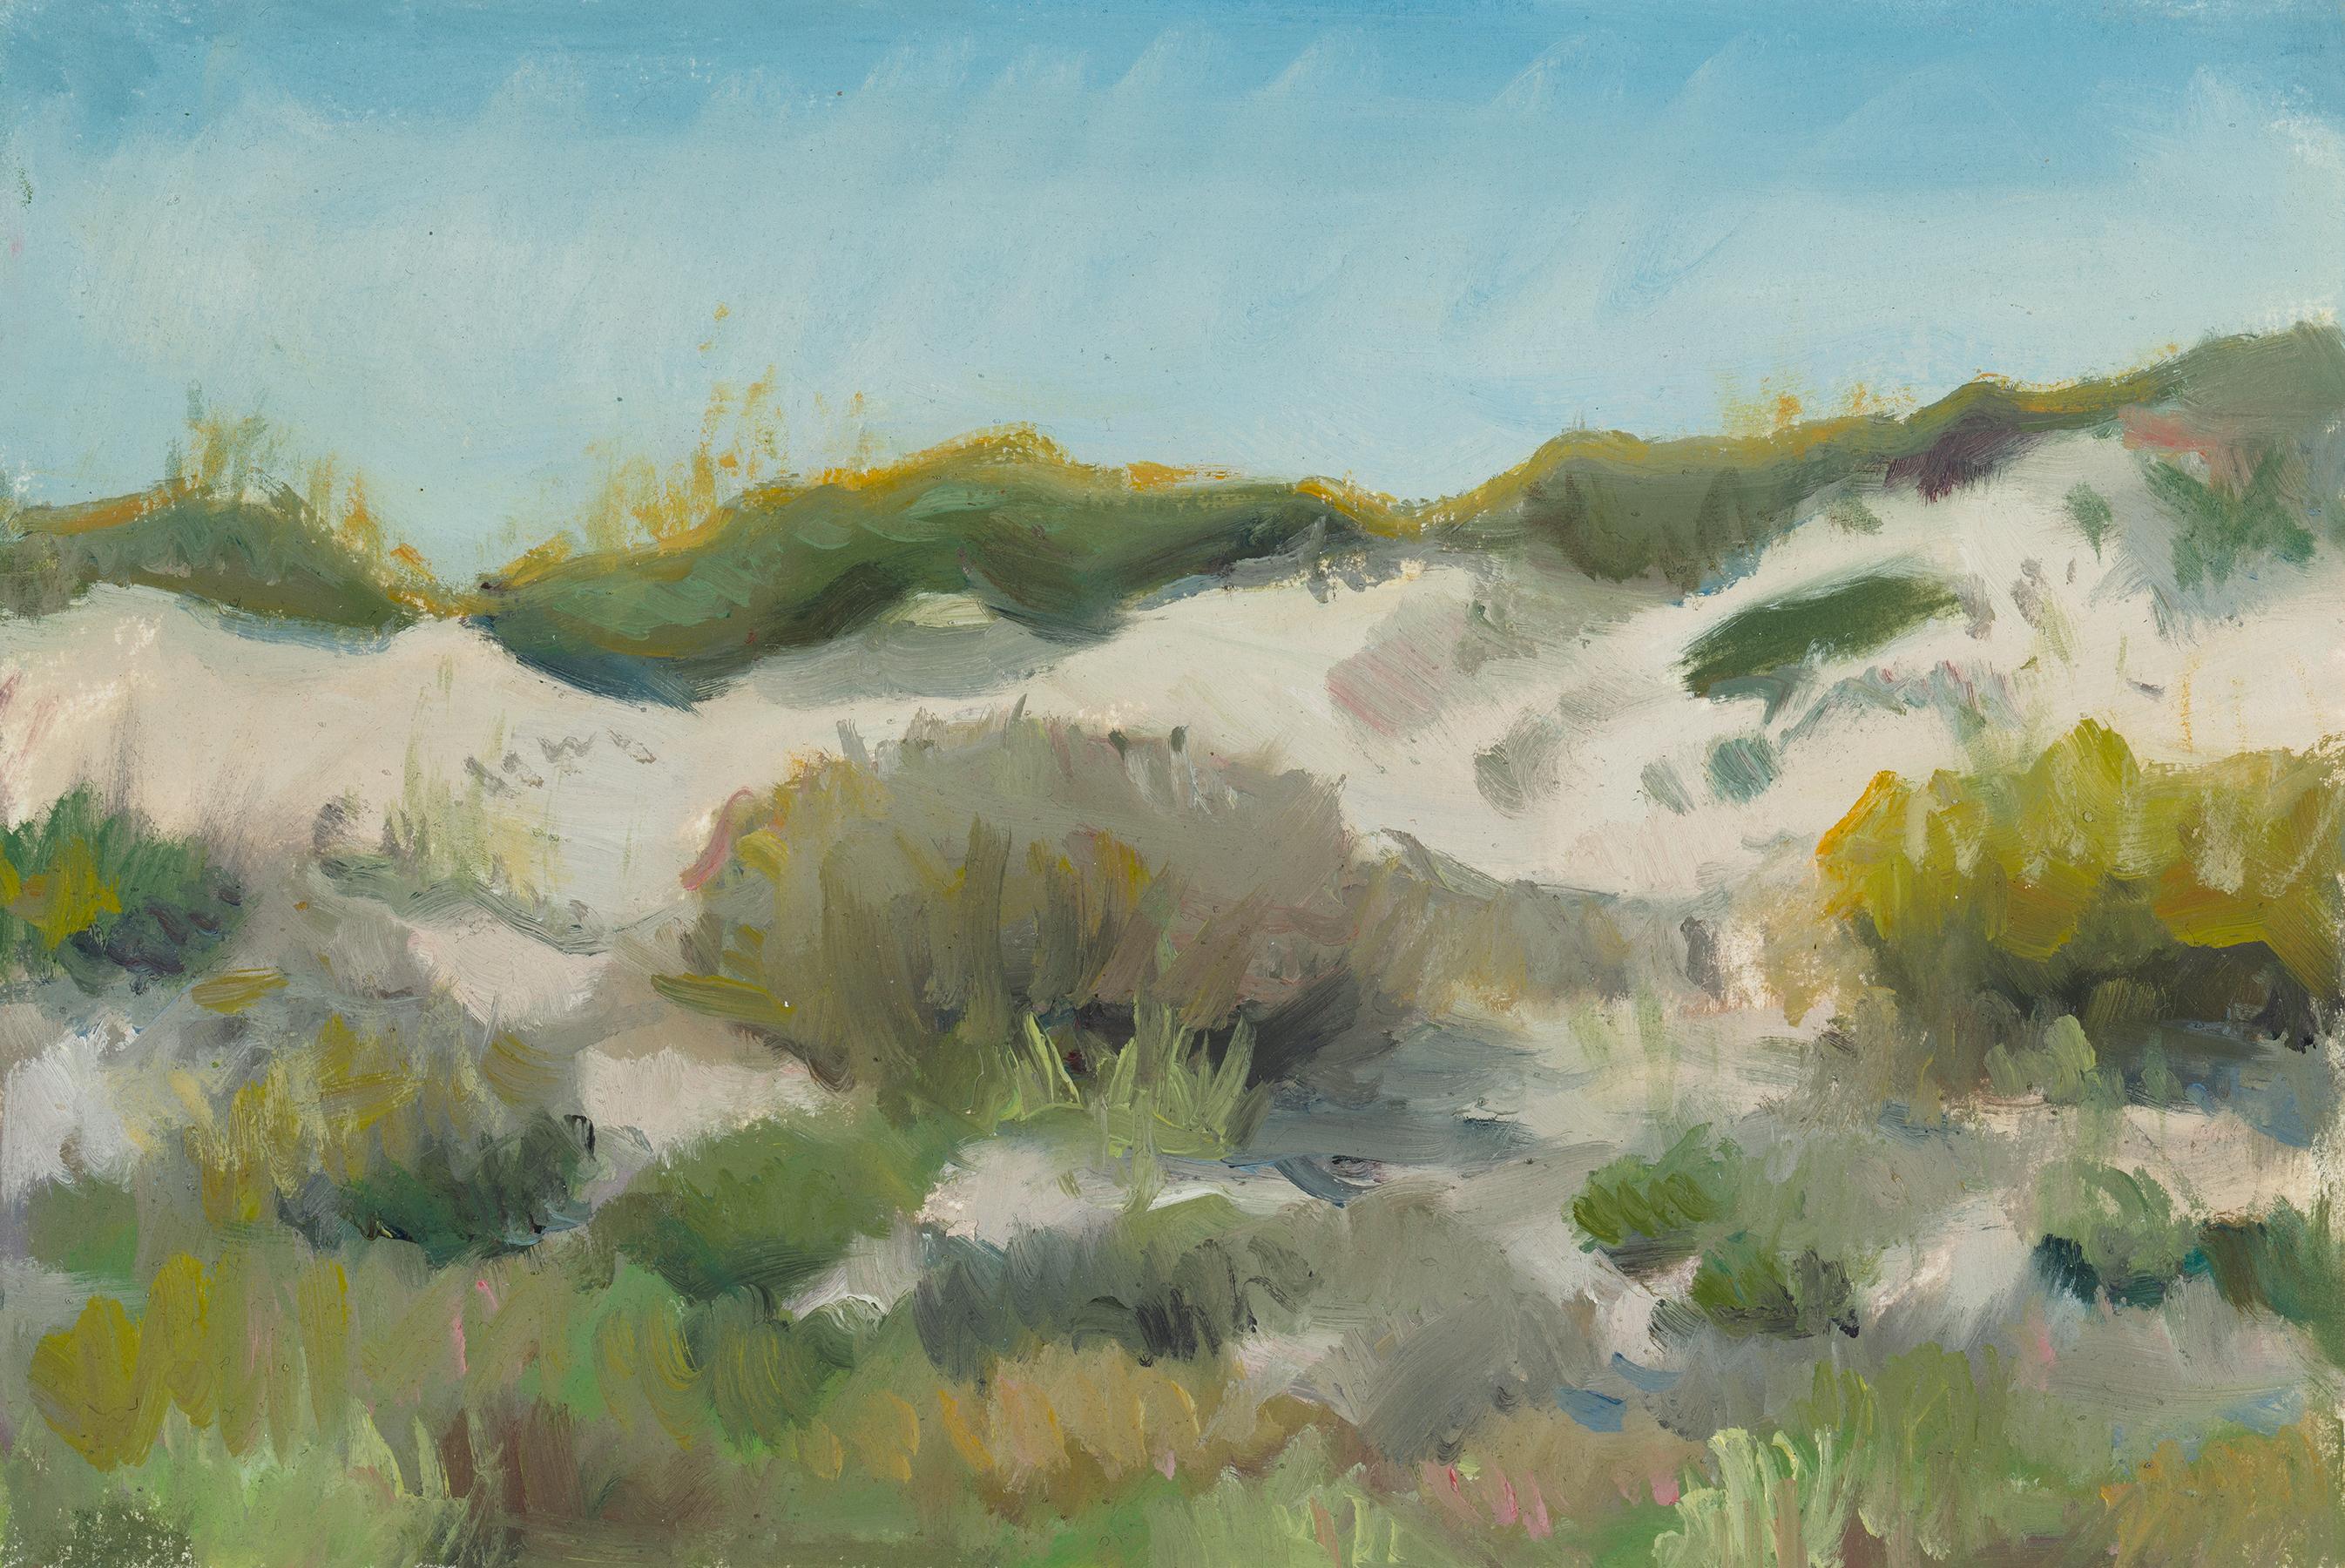 Dunes | Landscape Painting of Sand, Reeds, & Sky | Oil on Arches Oil Paper